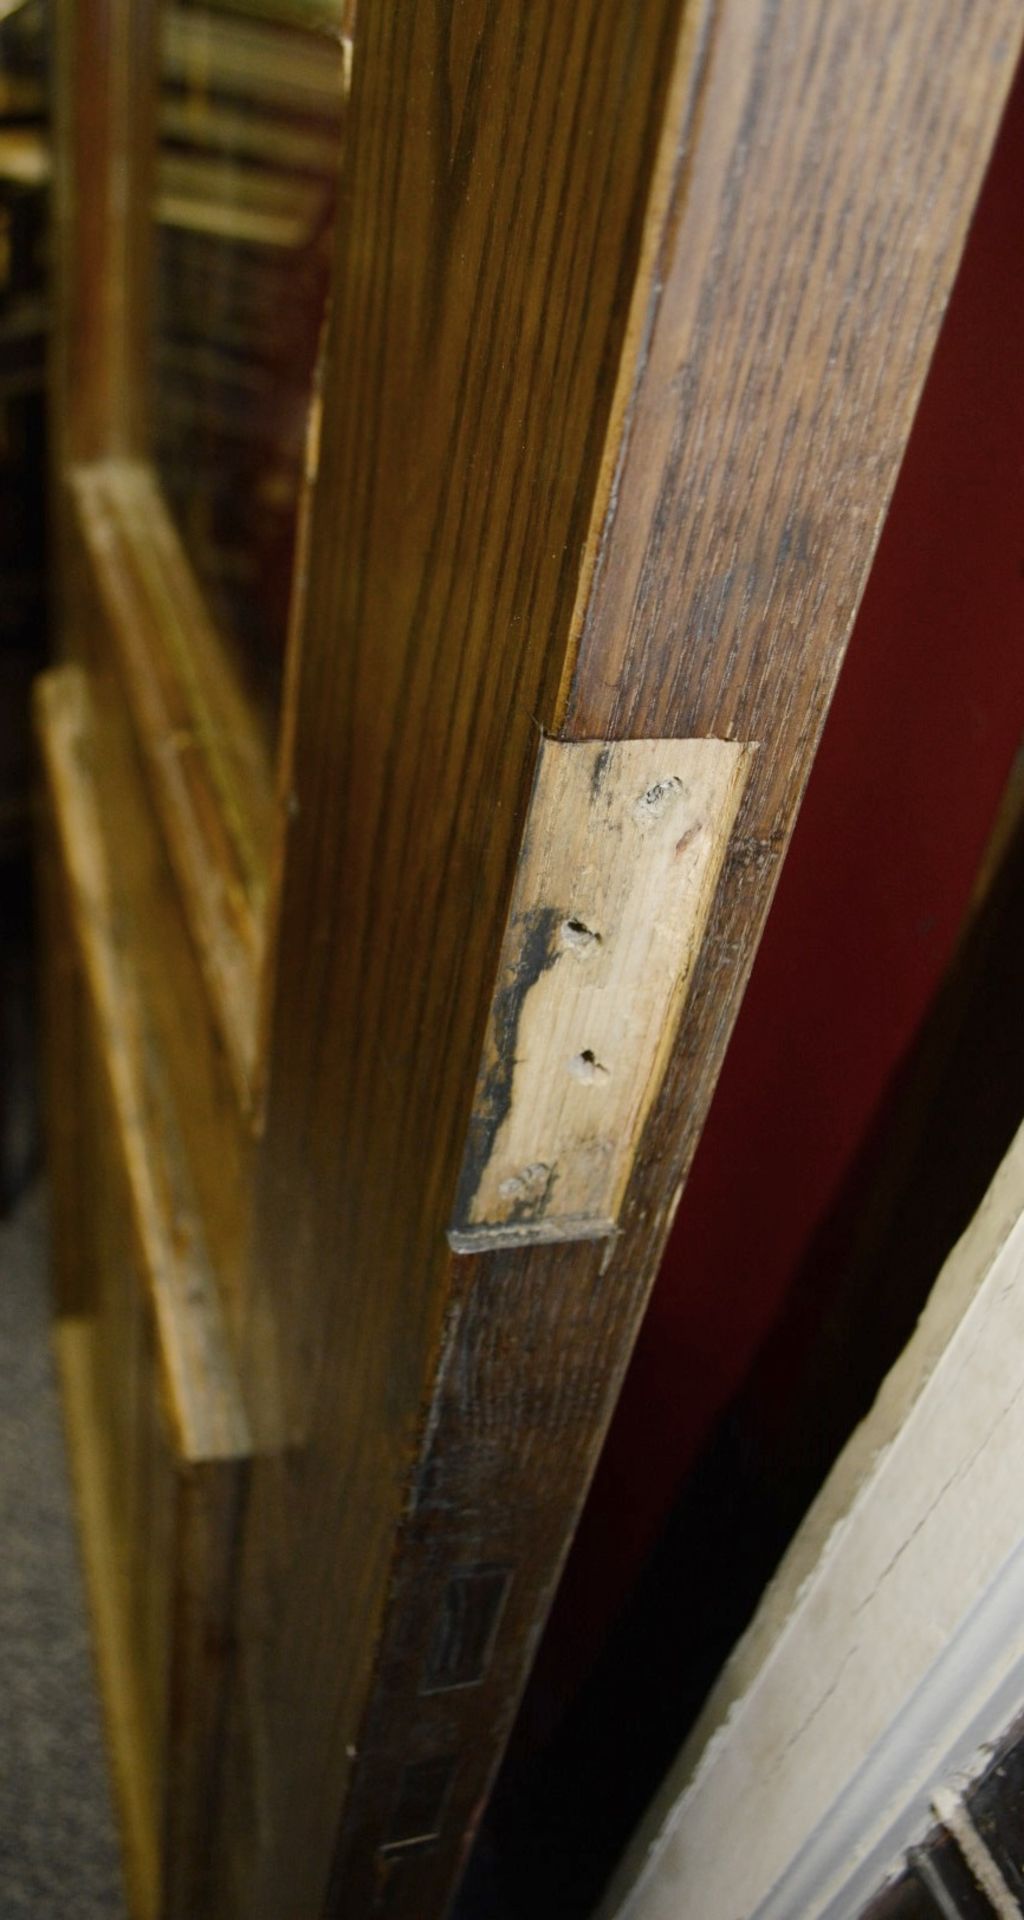 2 x Traditional Restaurant / Pub Bar Doors - Dimensions (approx) W82 x H201 x D4.5cm - Used, In Good - Image 4 of 7